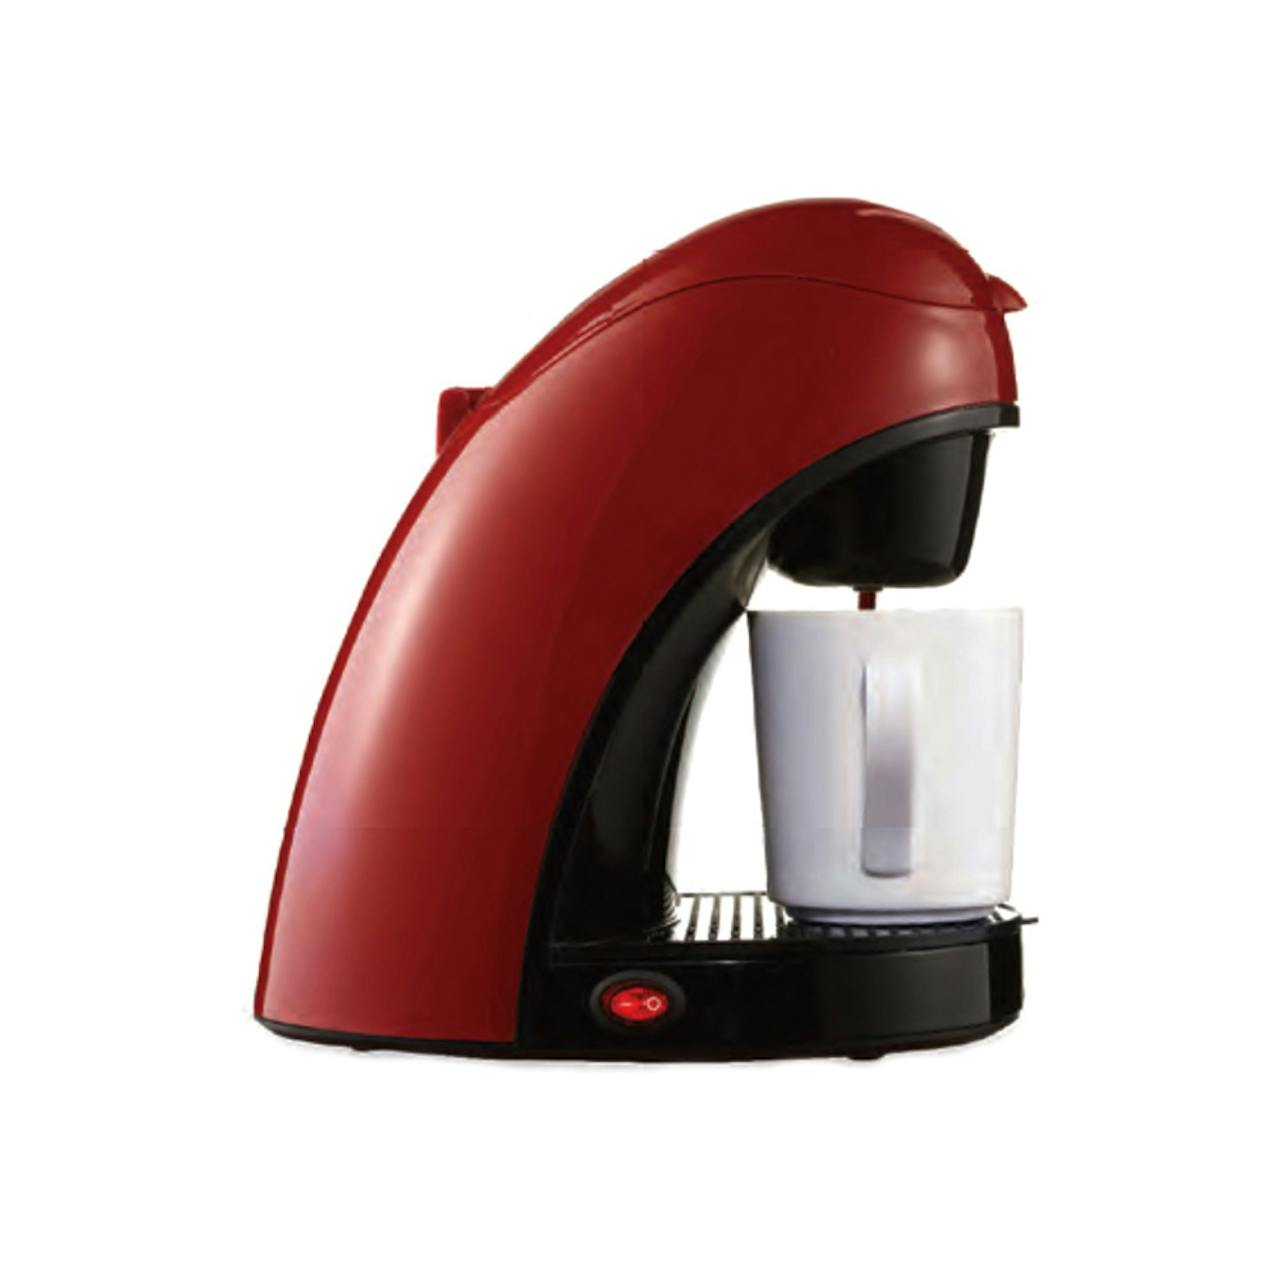 https://raneys-cdn11.imgix.net/images/stencil/original/products/205450/170744/Brentwood-TS-112B-Single-Serving-Coffee-Maker-26252__88964.1638909877.jpg?auto=compress,format&w=1280